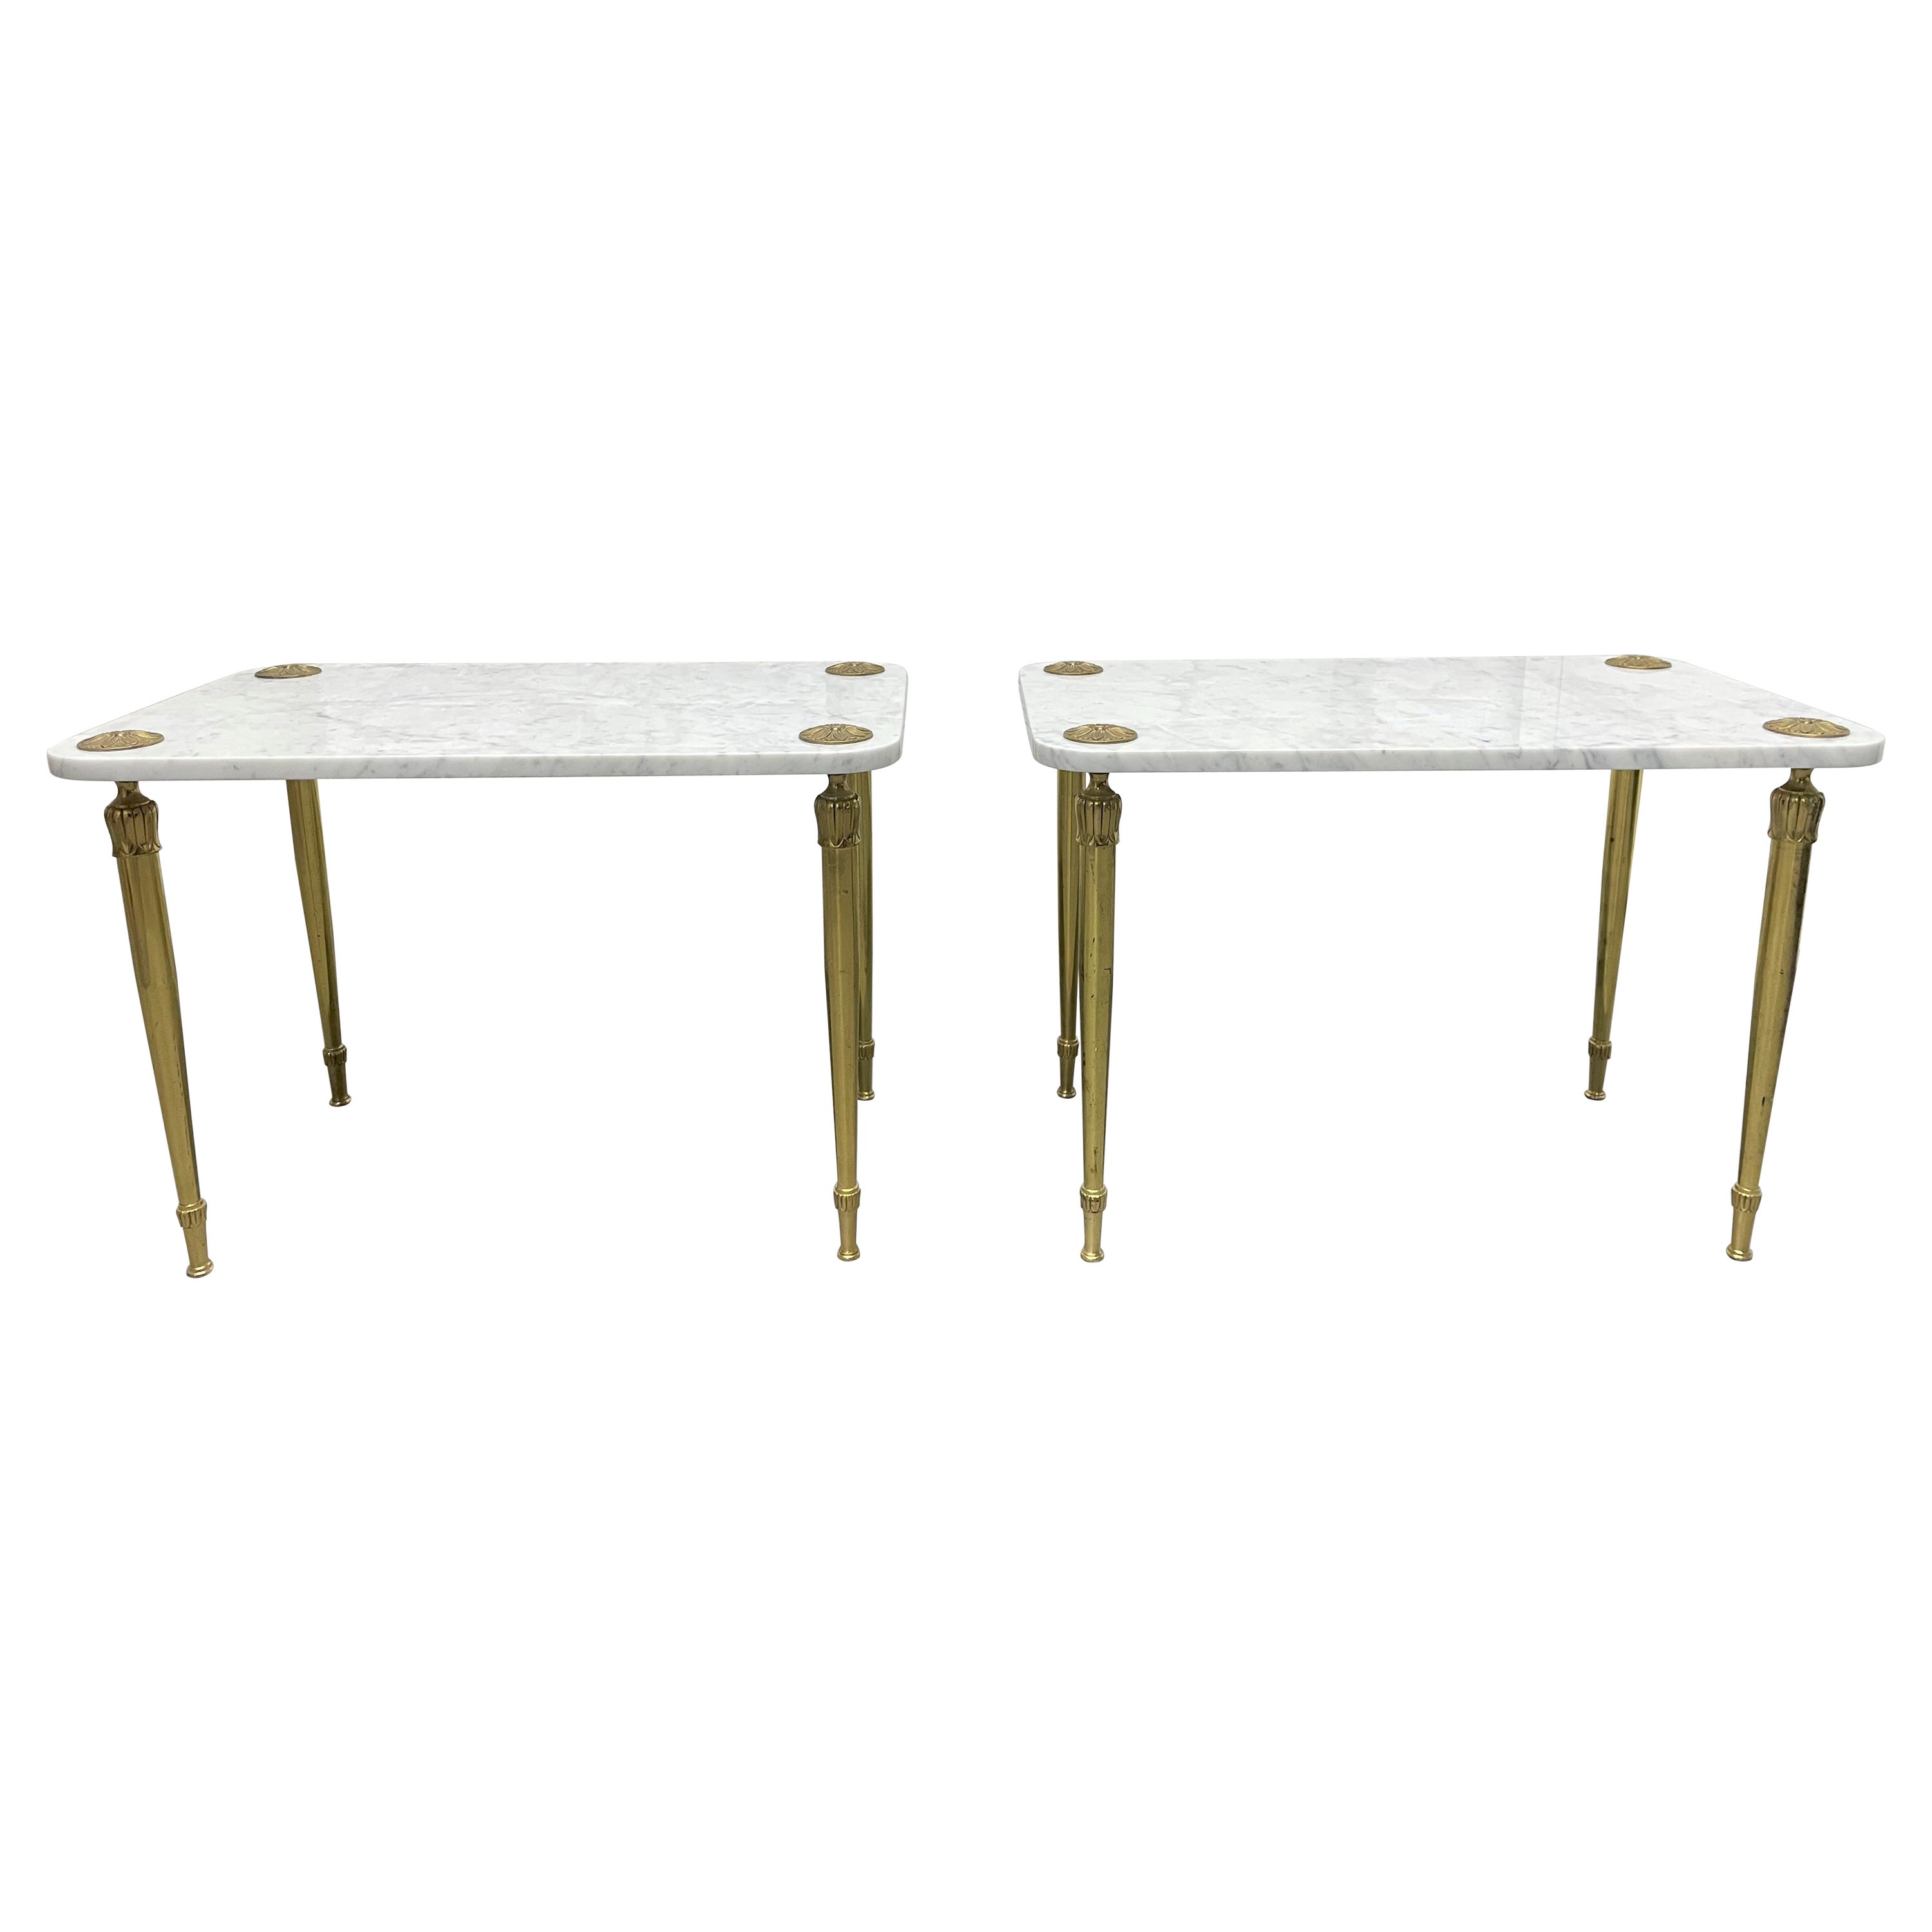 Pair of Italian carrara marble and brass side tables.